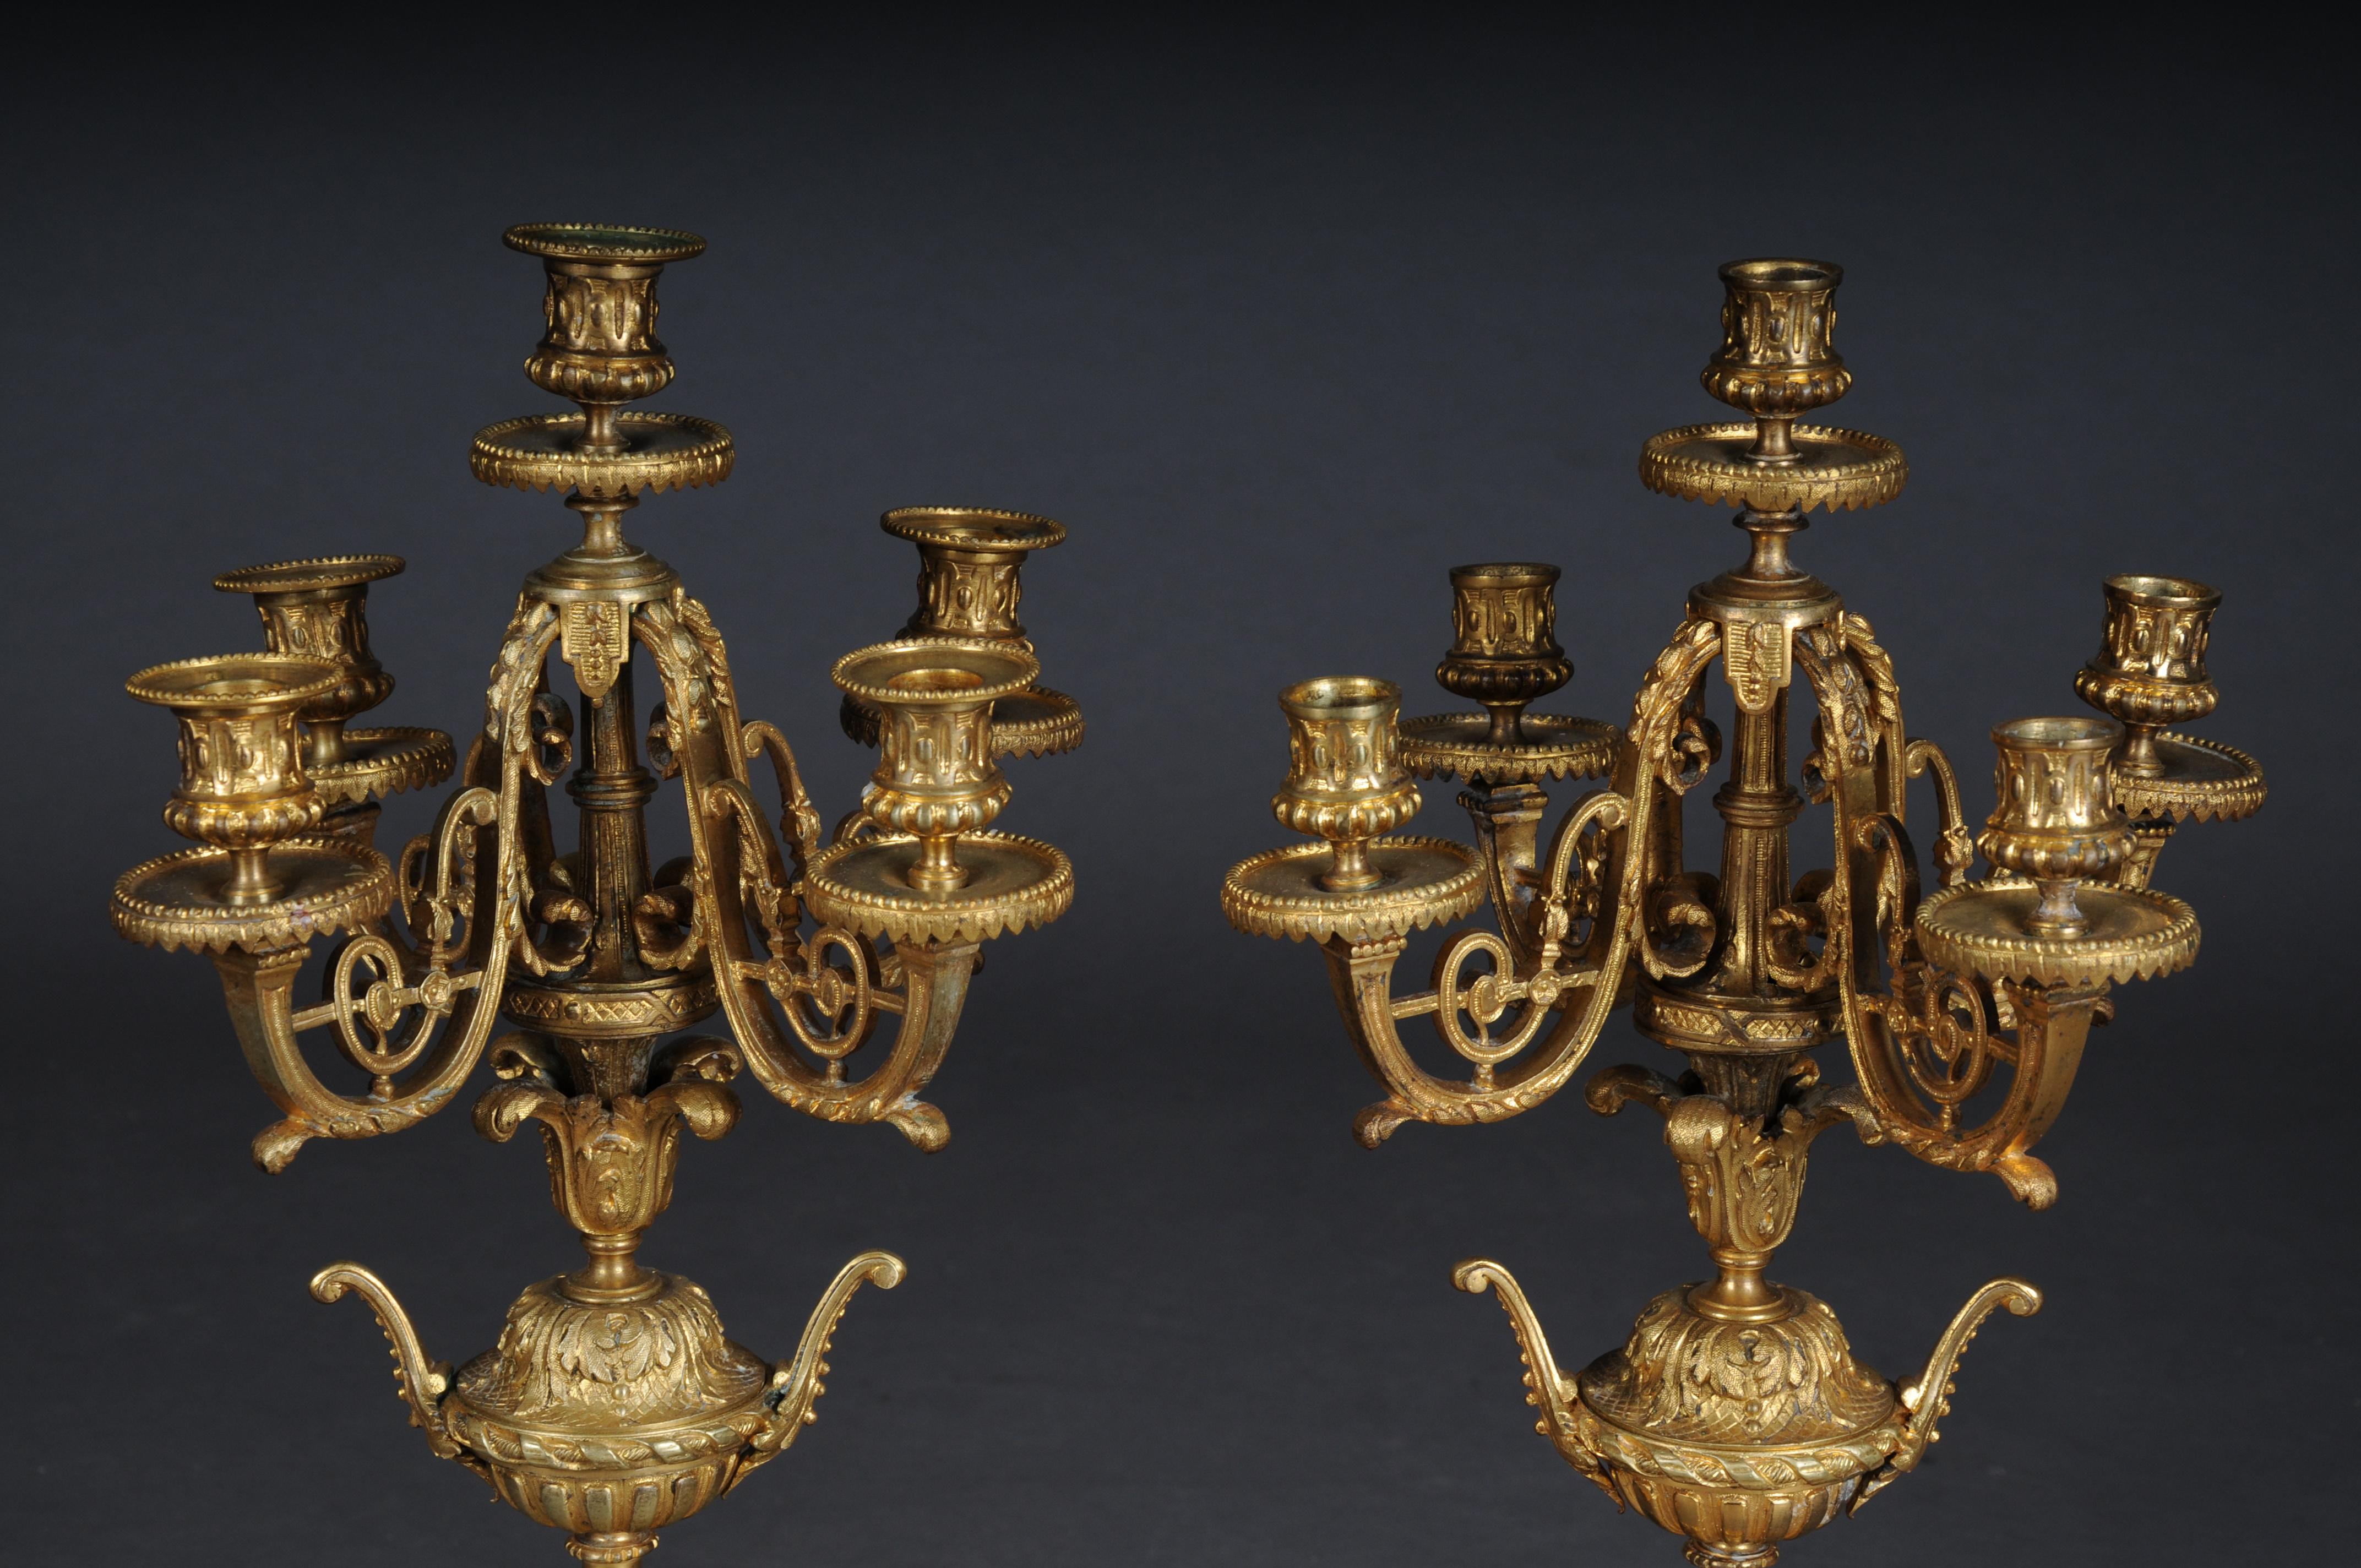 Pair (2) French historicism candlesticks, gilded bronze circa 1880

Ornate candlesticks, gilded bronze. Candlesticks with 5 flames each, lower part standing partly on volute and paw feet. Very decorative and ornate.

France, Hisorism around 1860-1880